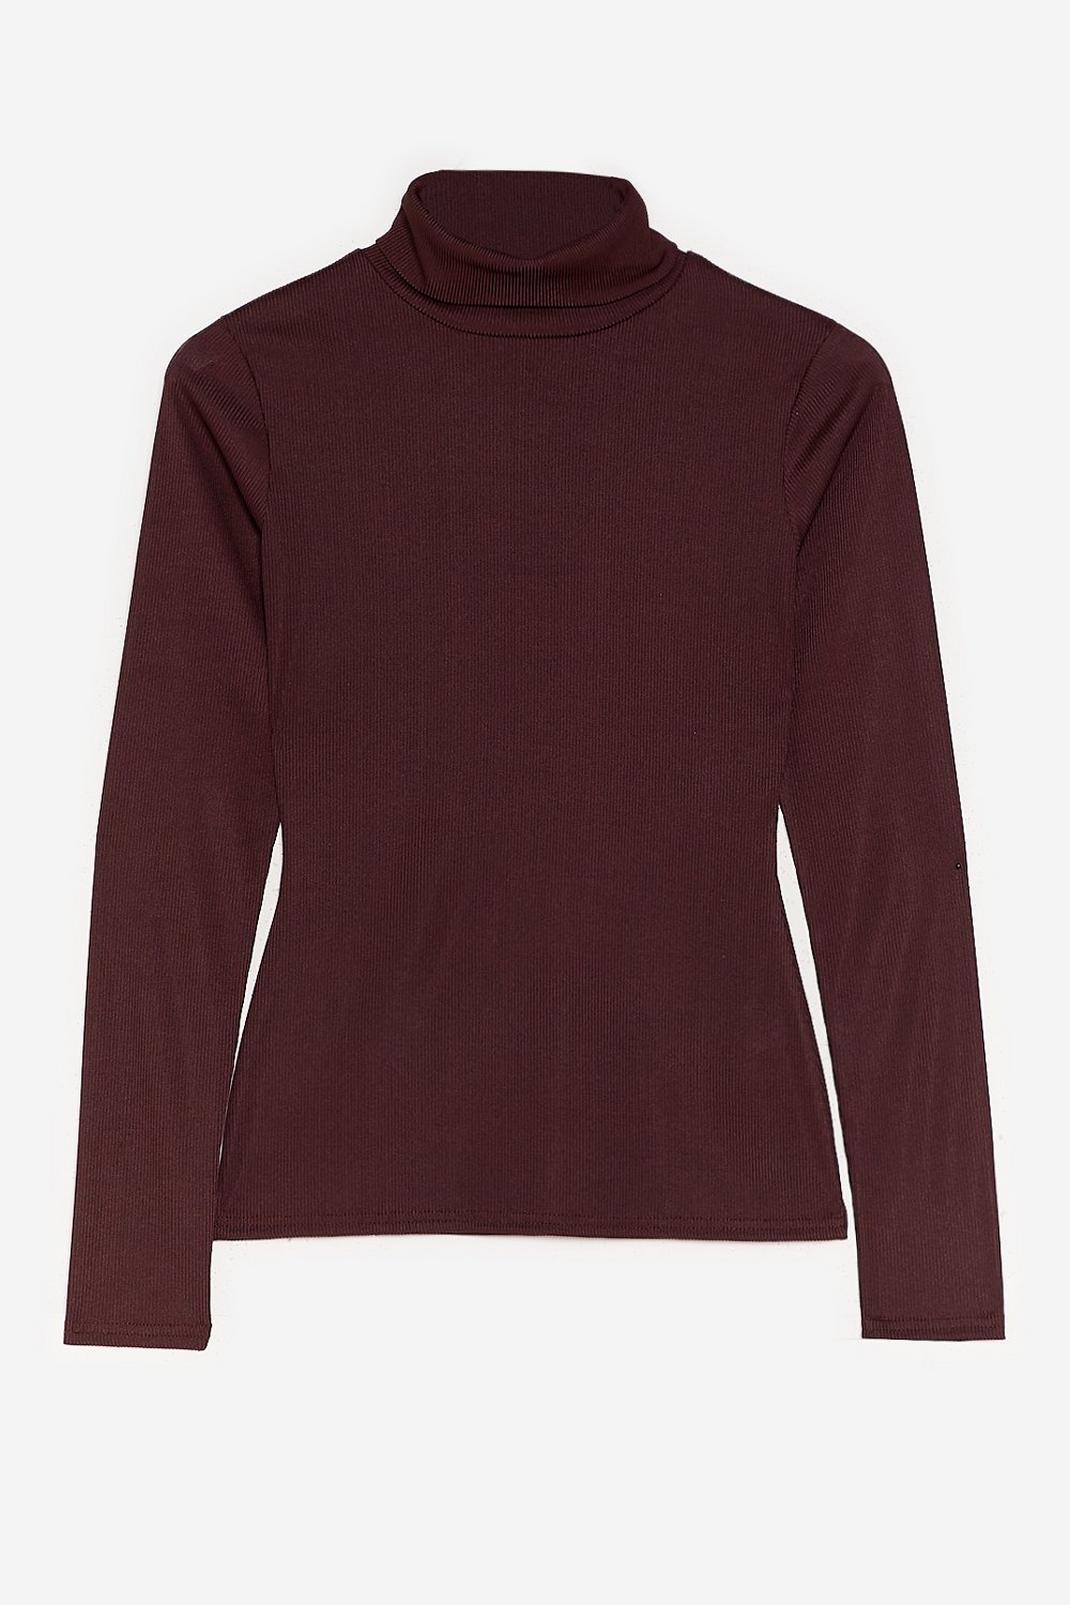 Chocolate Petite Fitted Turtleneck Top image number 1